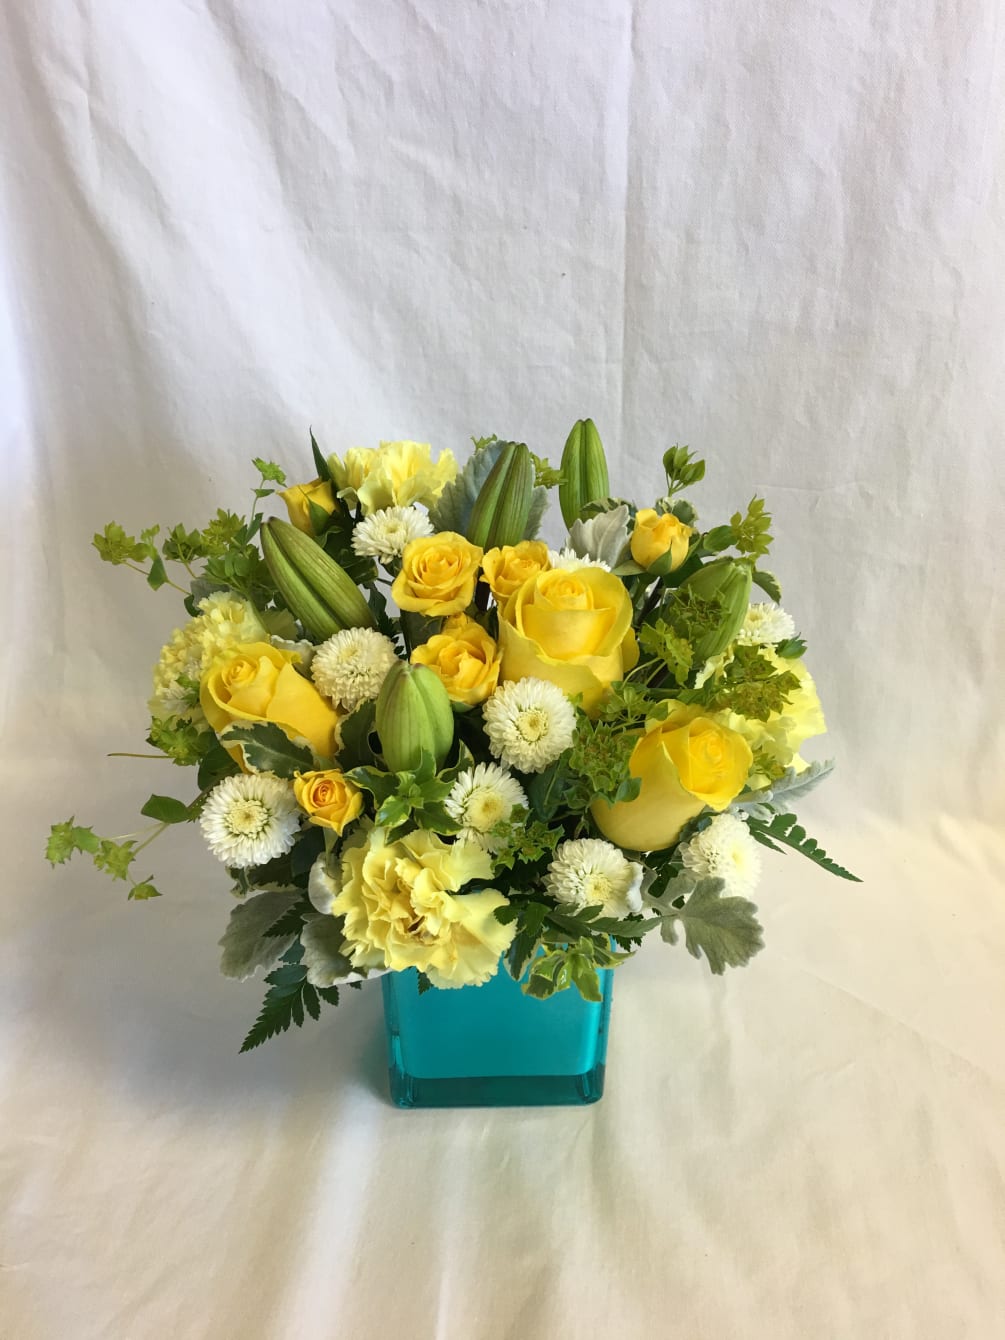 Mixed white, yellow and green of roses and lilies with summer refresh